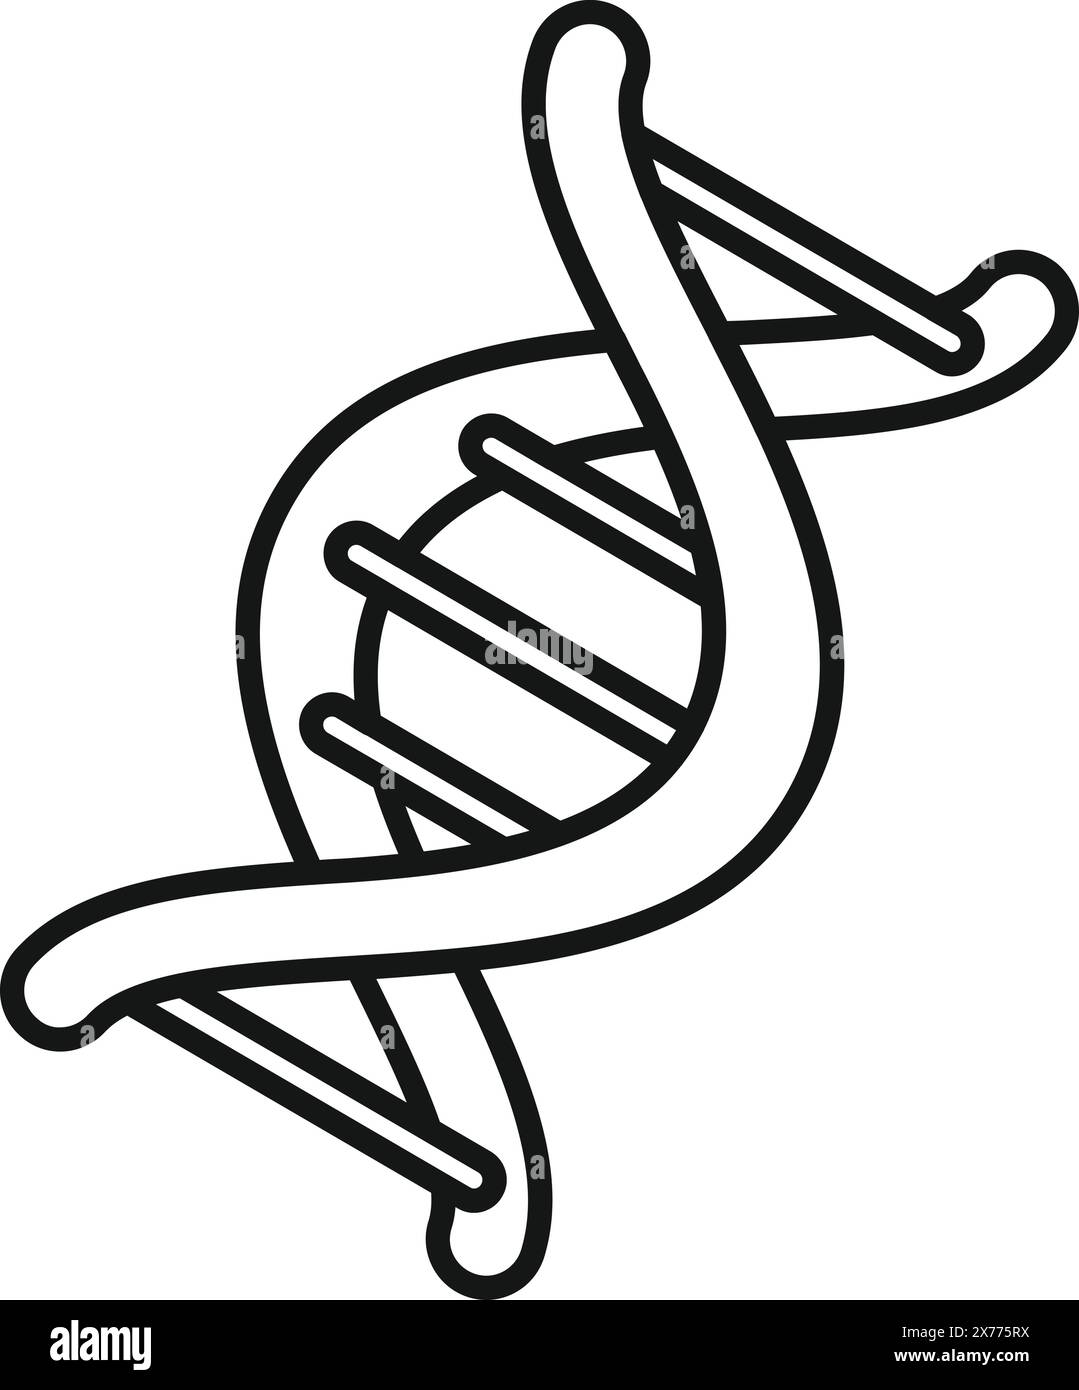 Detailed black and white vector illustration of a double helix dna strand, depicting the molecular structure and genetic makeup, suitable for biology, genetics, and medical research concepts Stock Vector